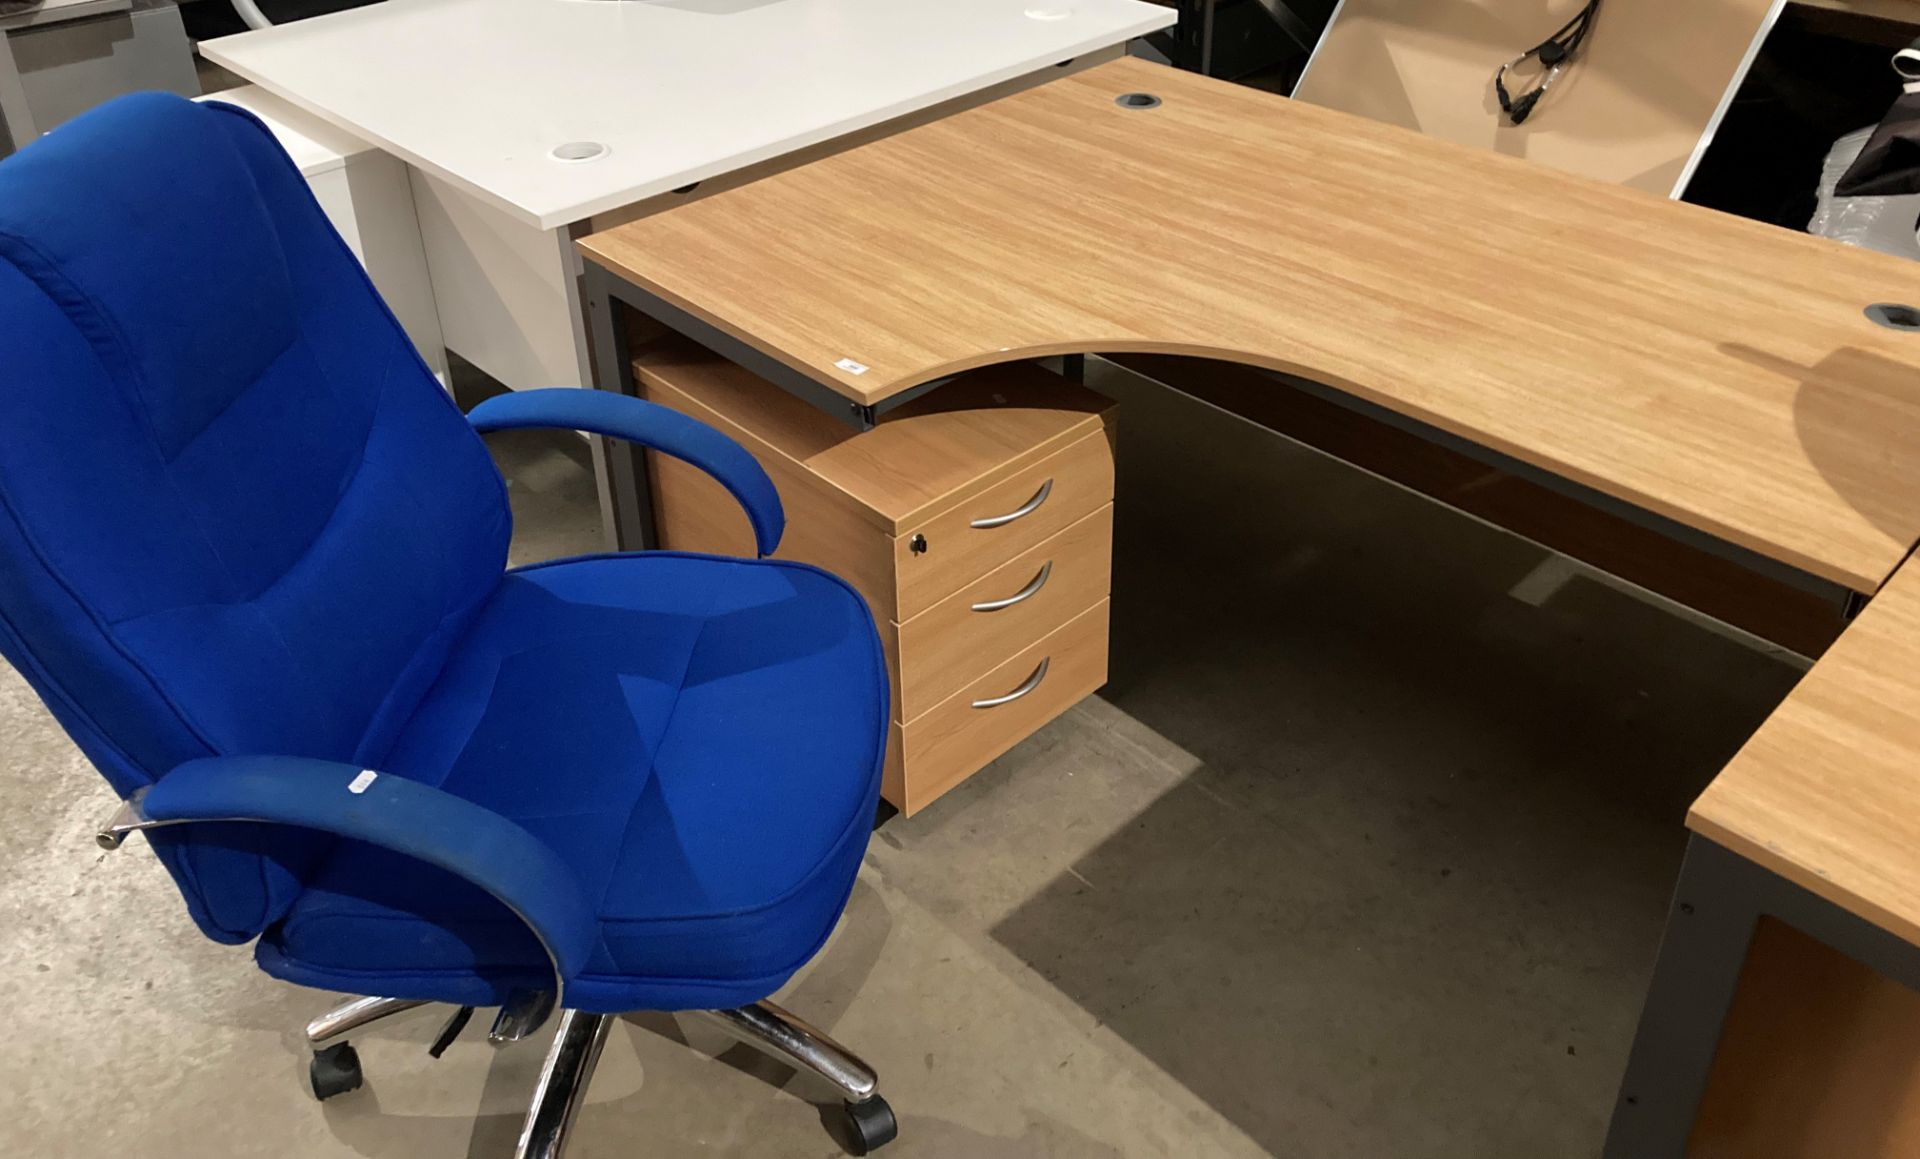 Metal-framed curved office desk c/w blue high-back swivel office armchair and three-drawer pedestal